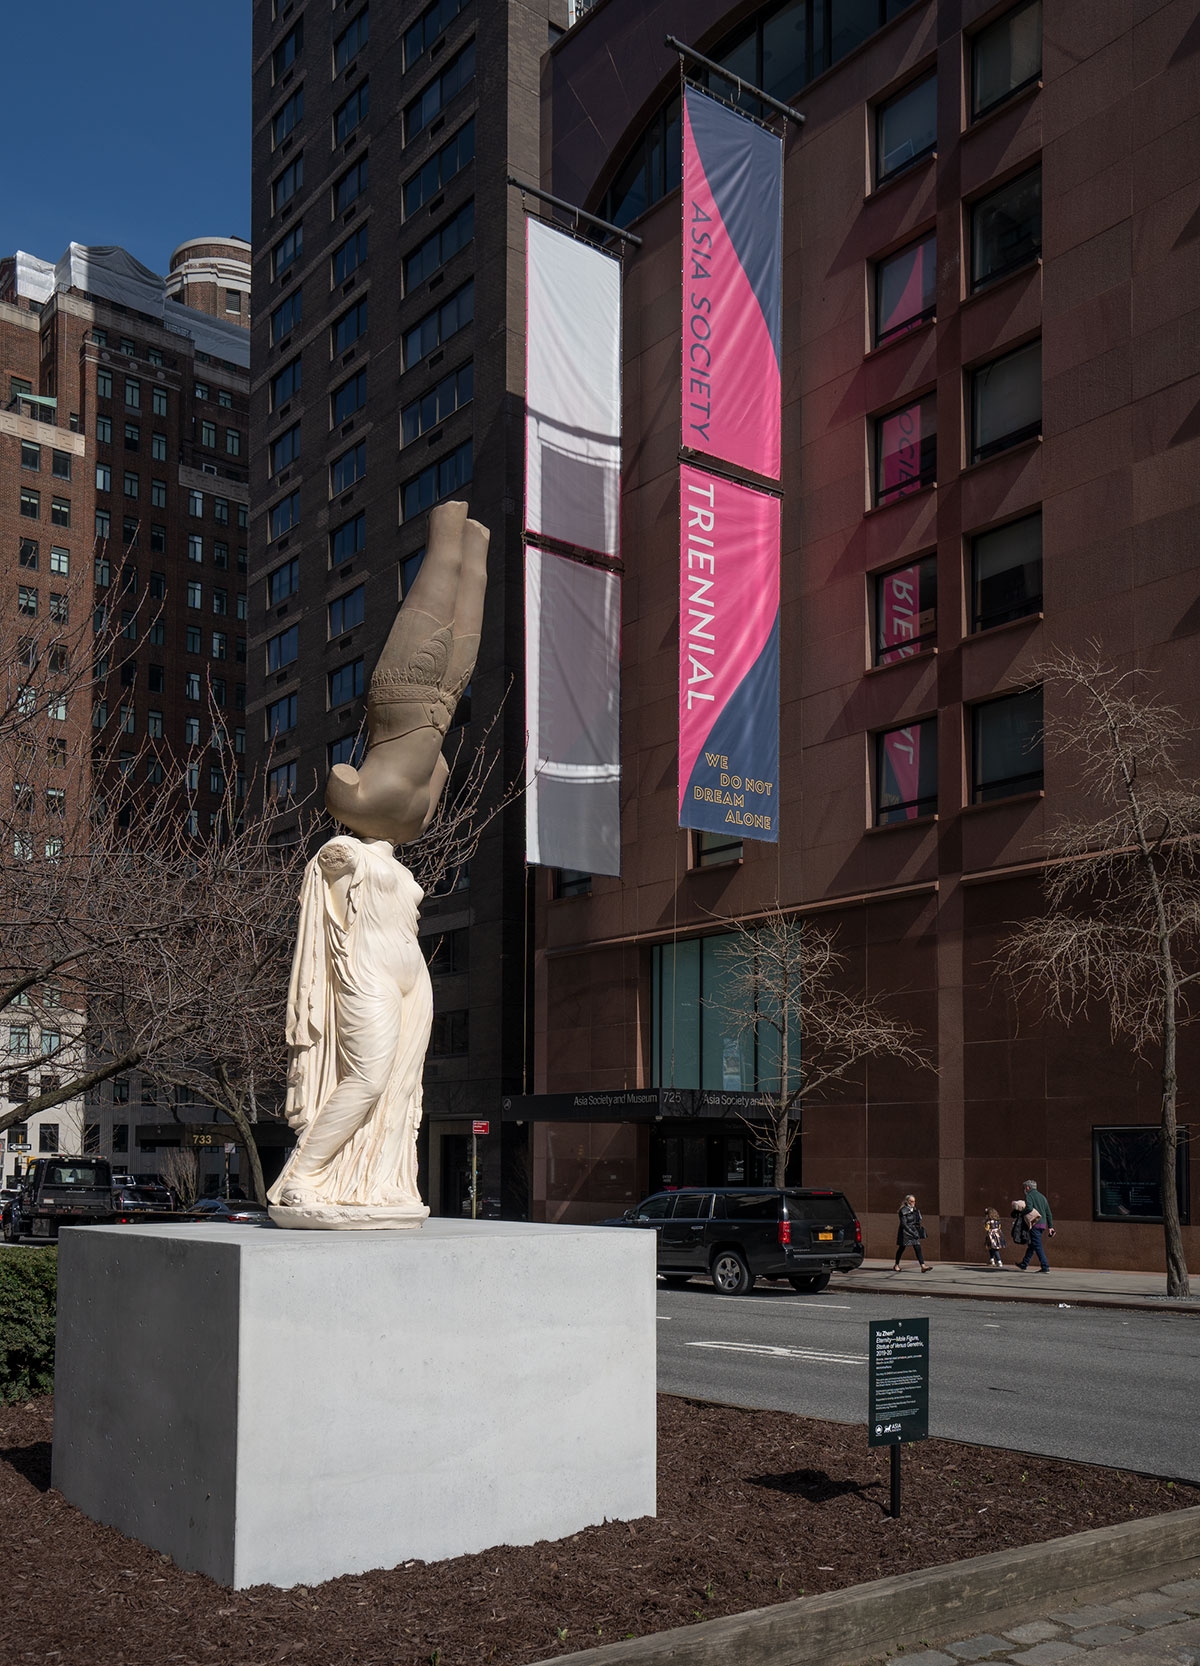 A plinth appears on a median outside of Asia Society Museum. On it is a sculpture composed of two casts: on top an inverted bronze-colored eleventh-century male figure from Cambodia, balanced atop a light beige cast of a second-century Roman figure of Venus Genetrix. Neither figure has a head.